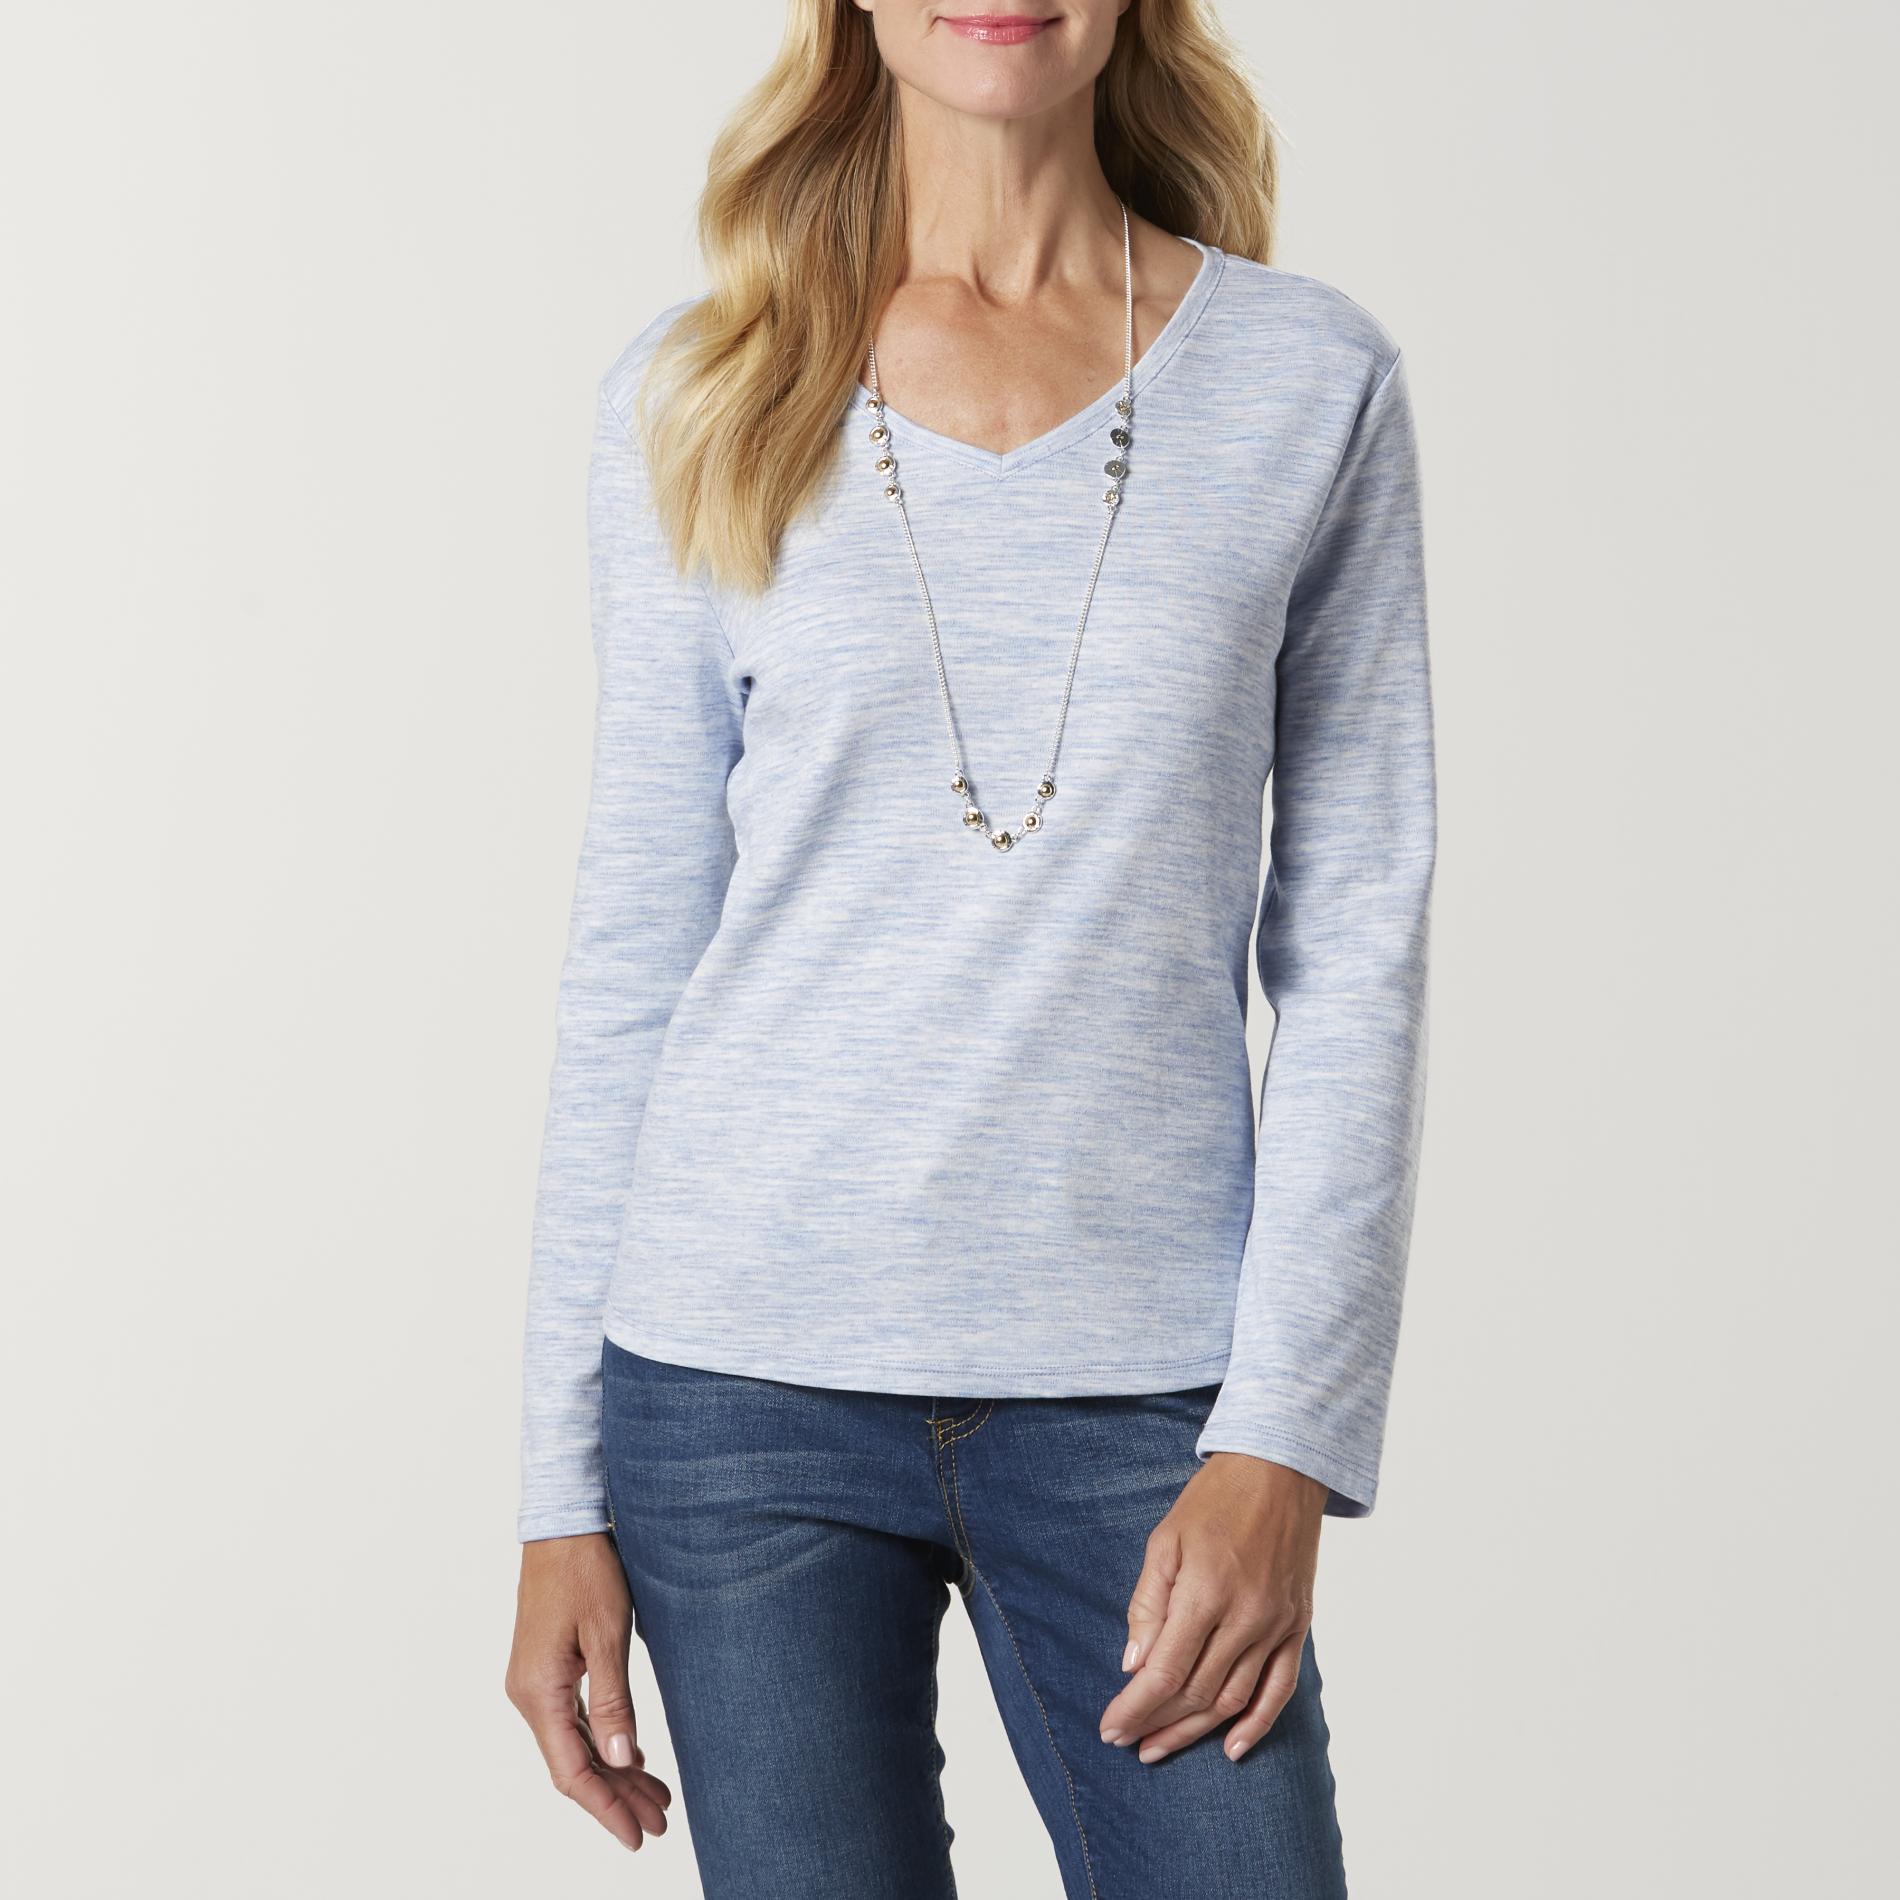 Basic Editions Women's Long-Sleeve V-Neck T-Shirt - Space-Dyed